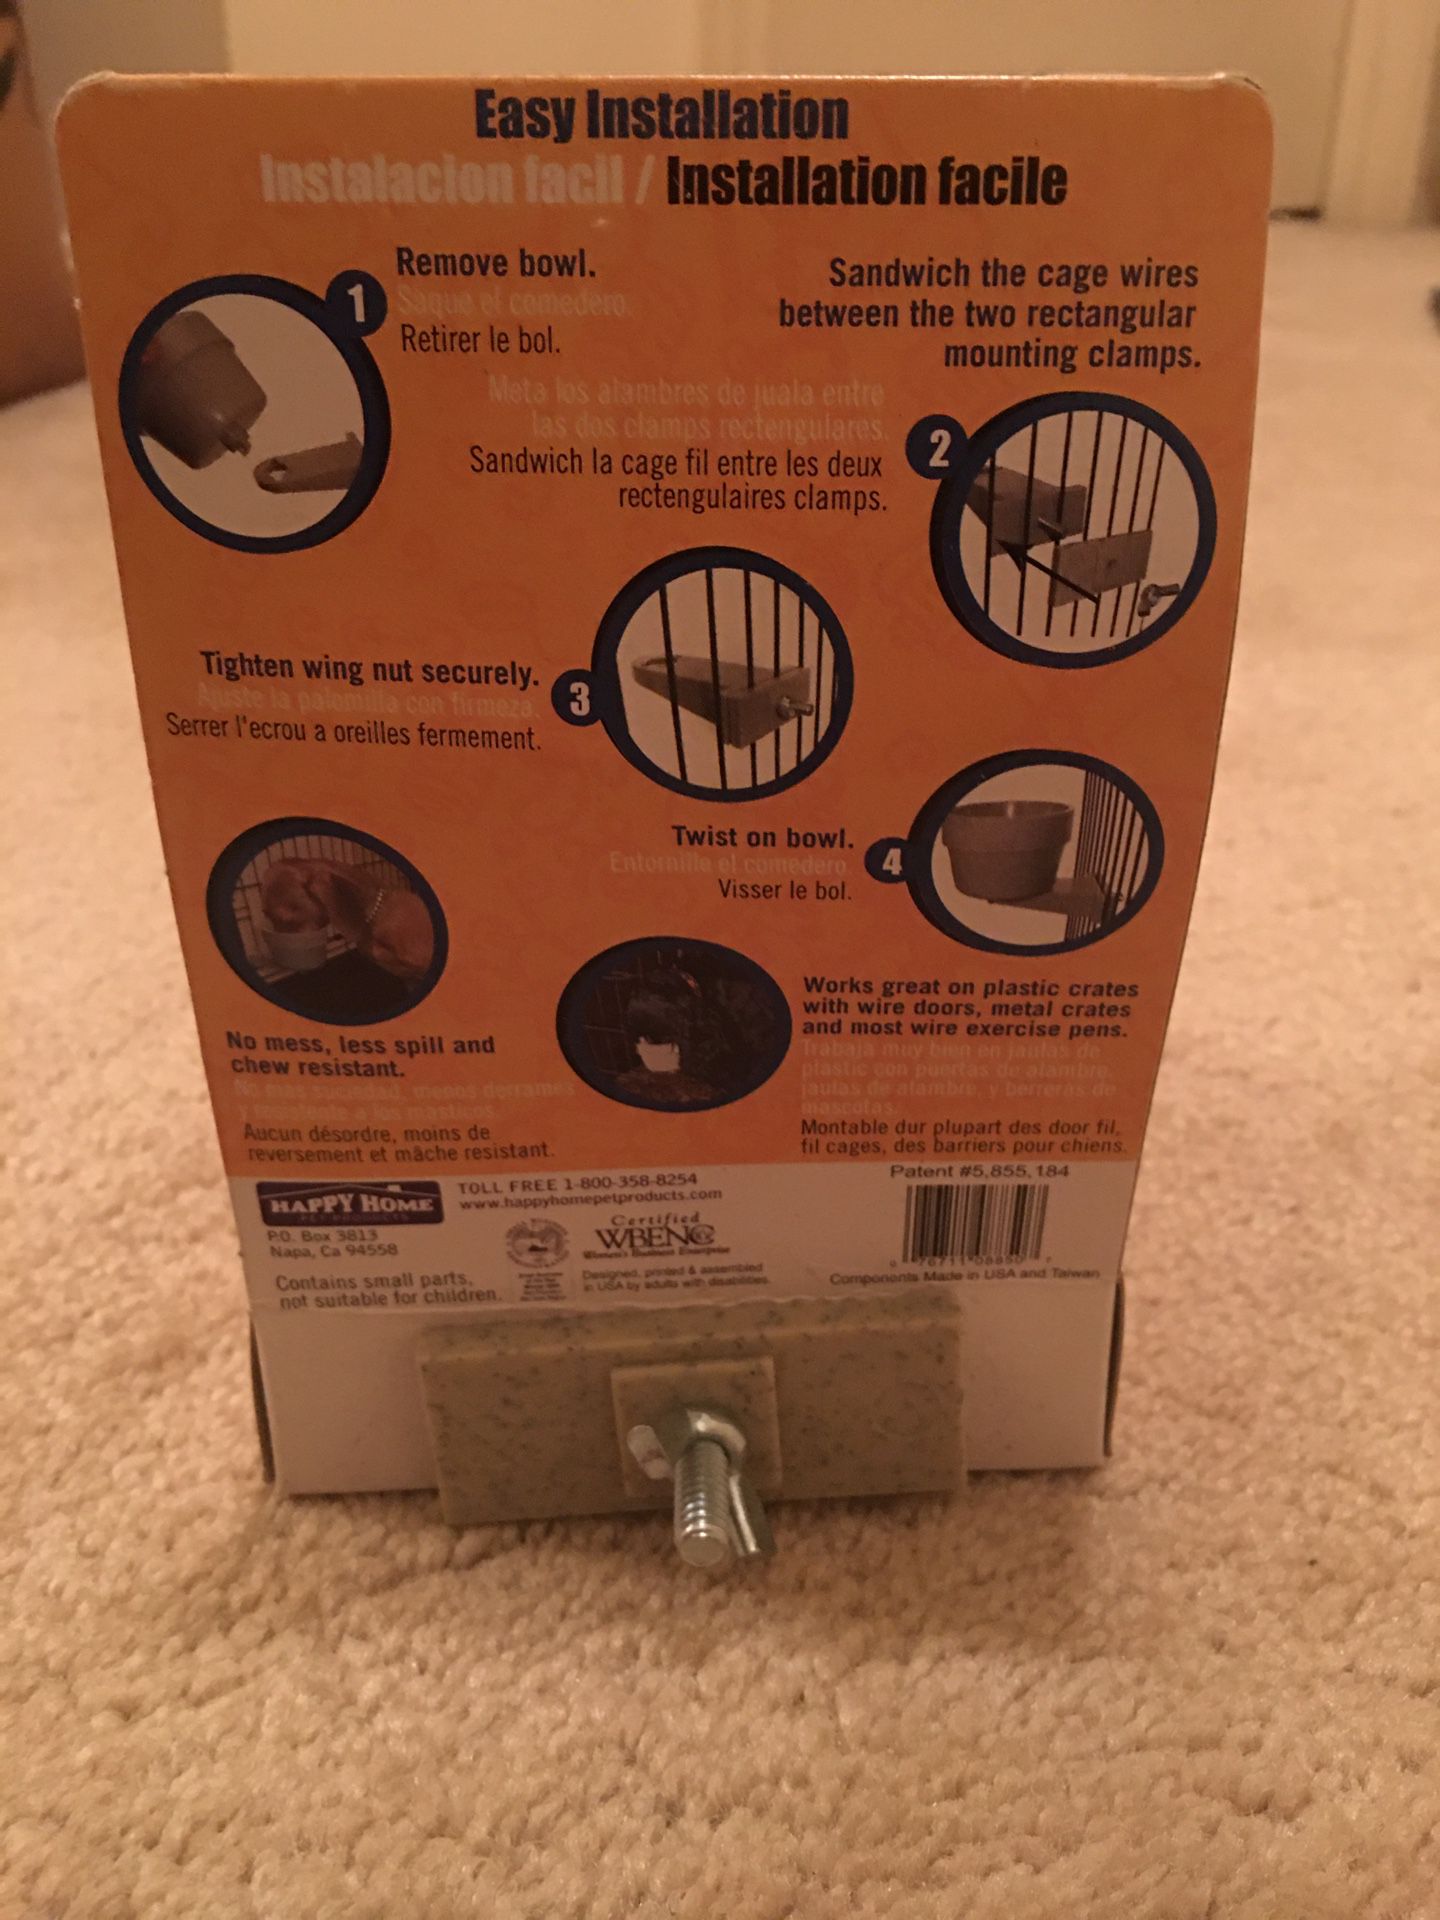 Dog crate bowl NWT